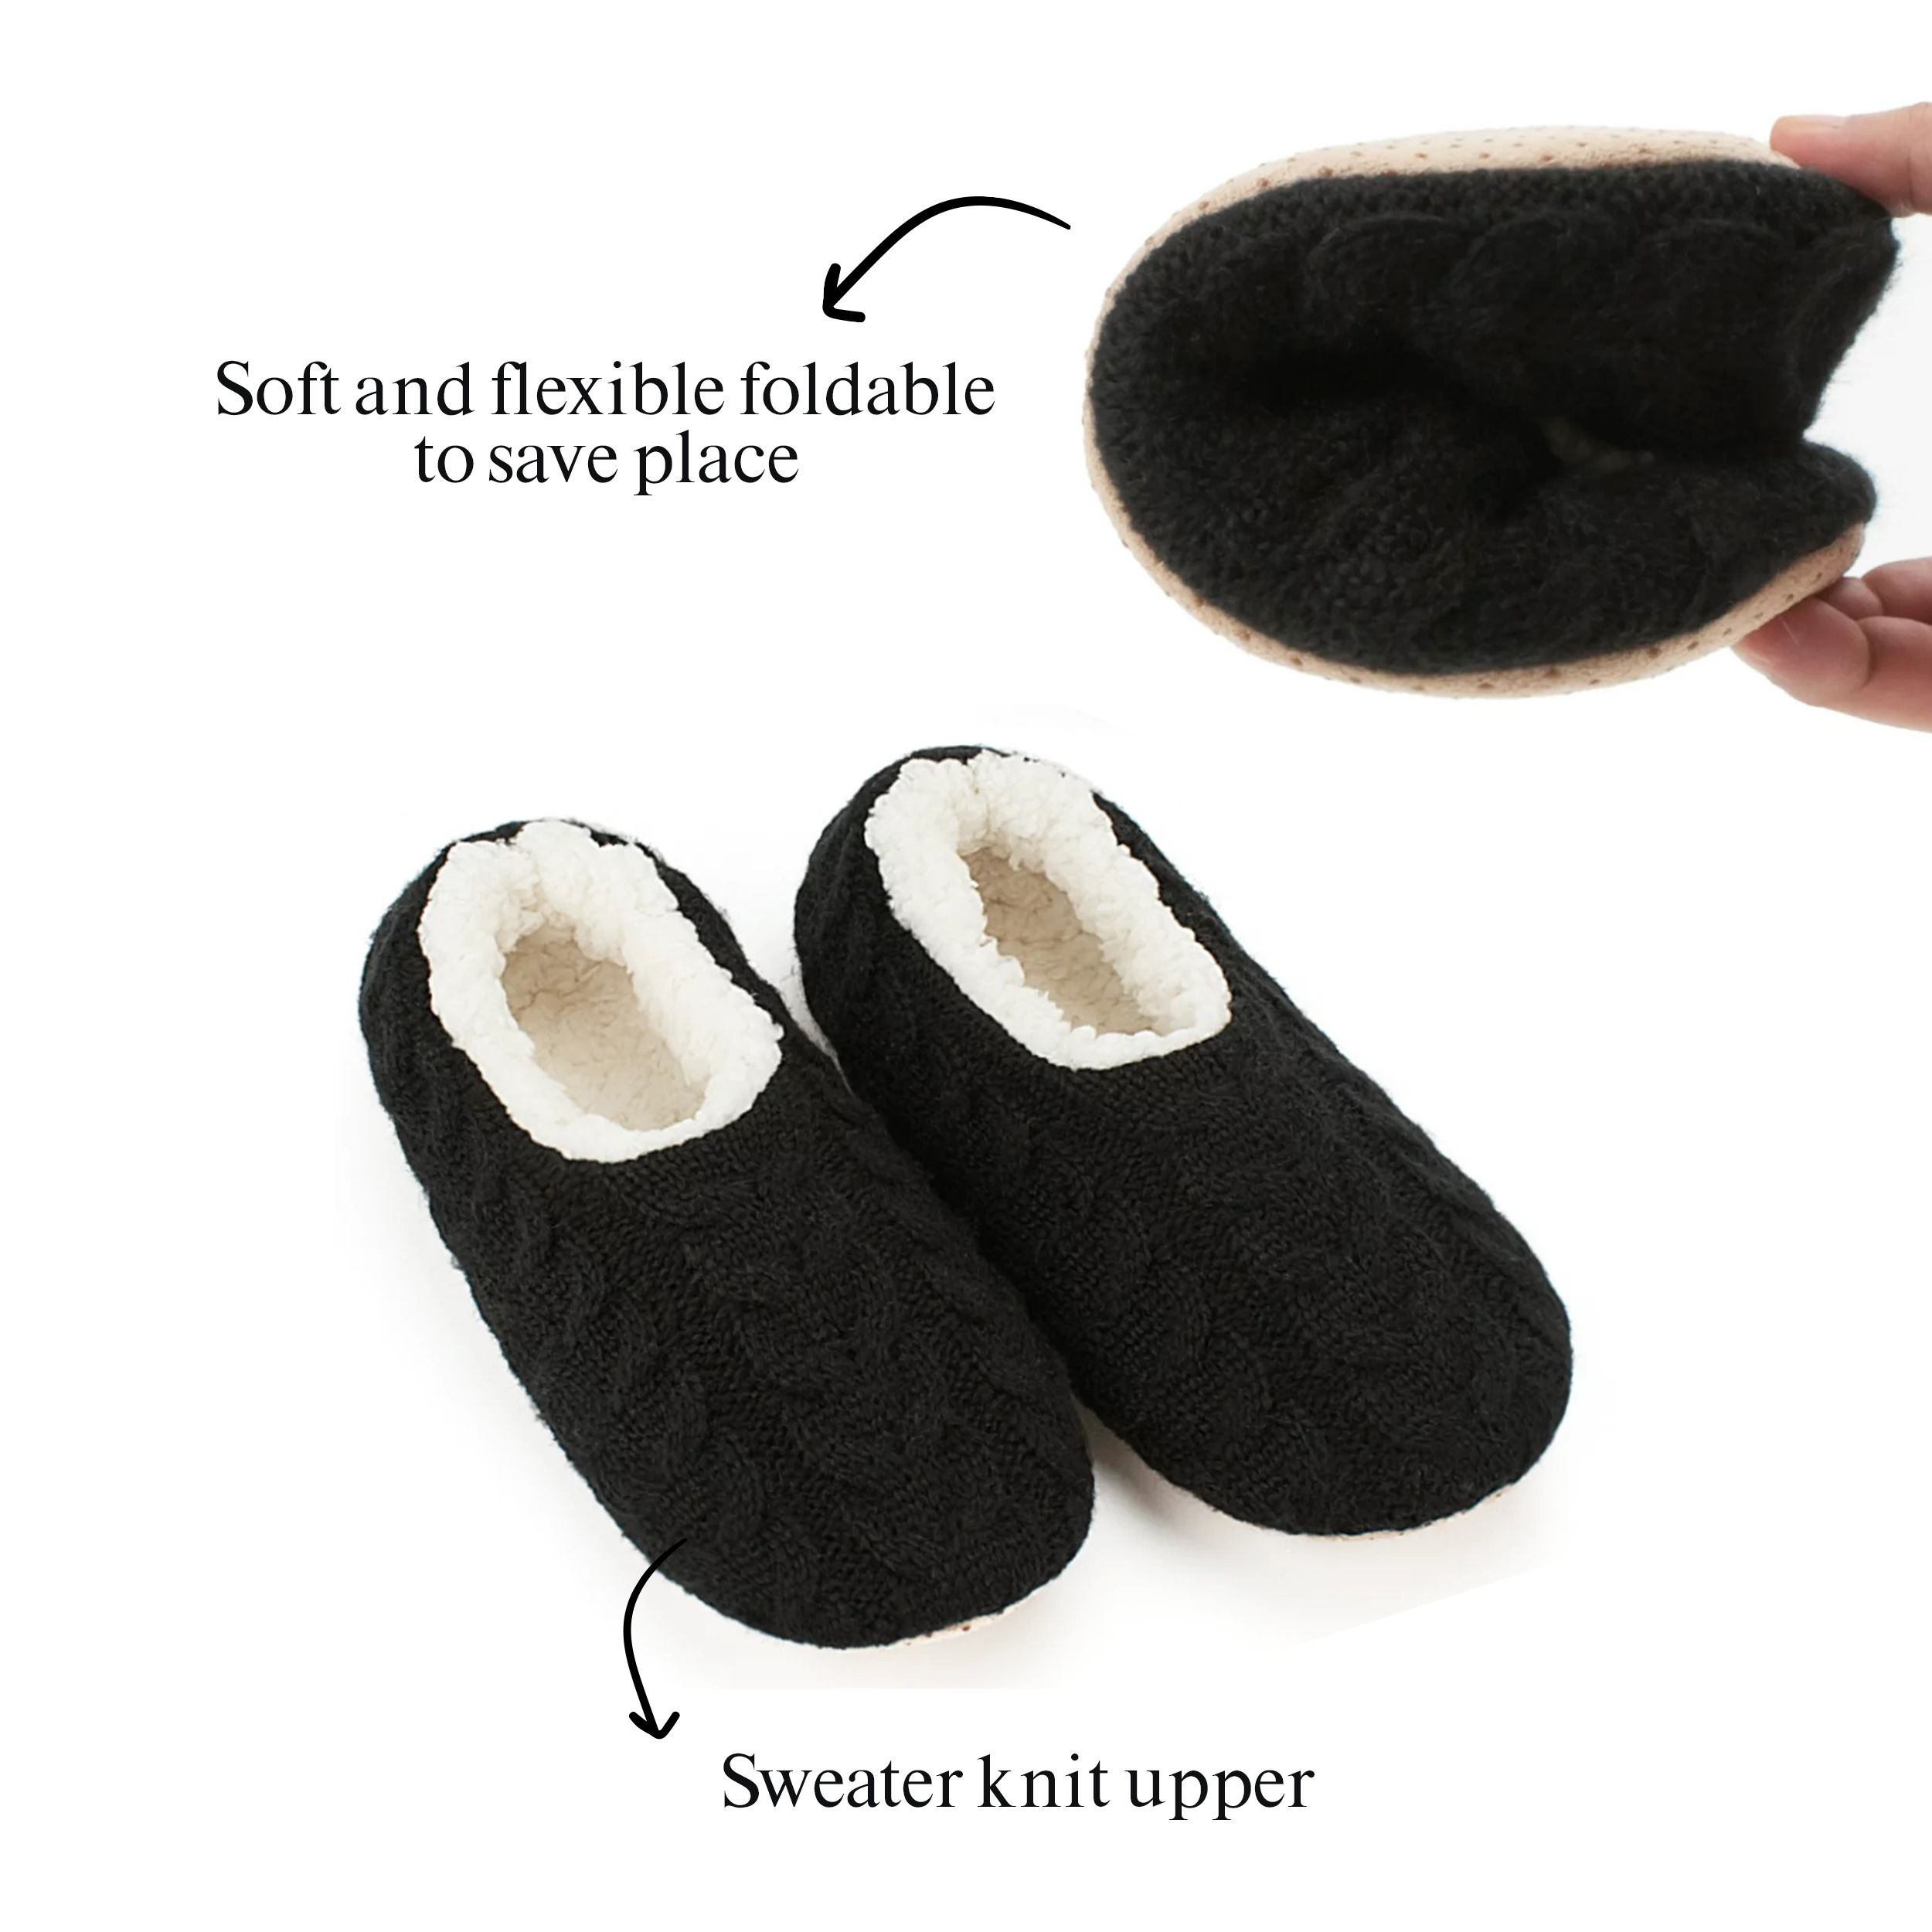 3-Pairs: Women's Cozy Sherpa-Lined Slipper Socks With Non-Skid Sole Grippers - Print